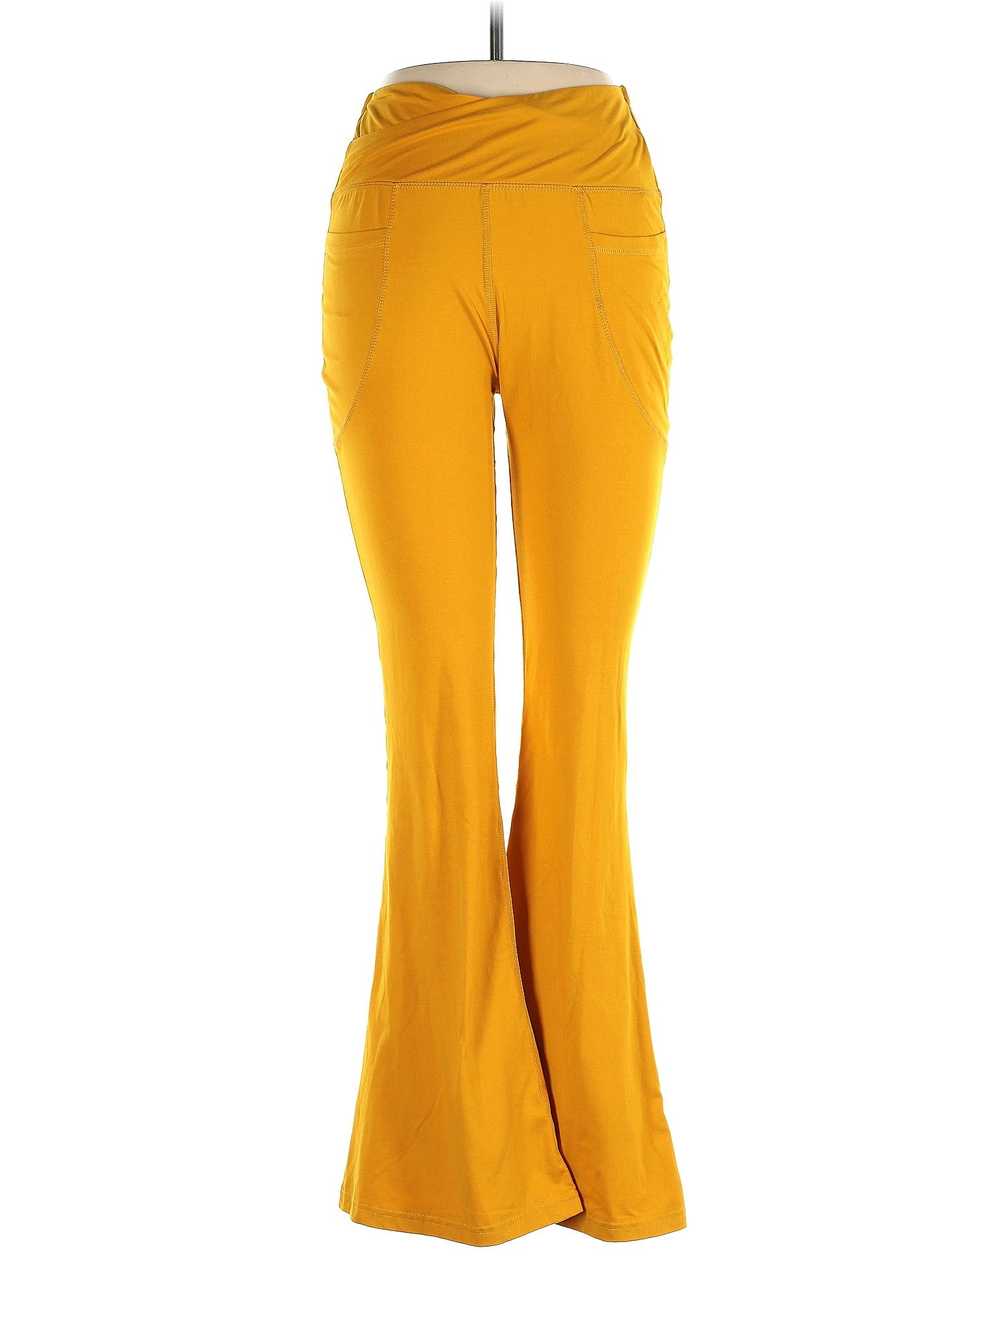 Unbranded Women Yellow Casual Pants S - image 1